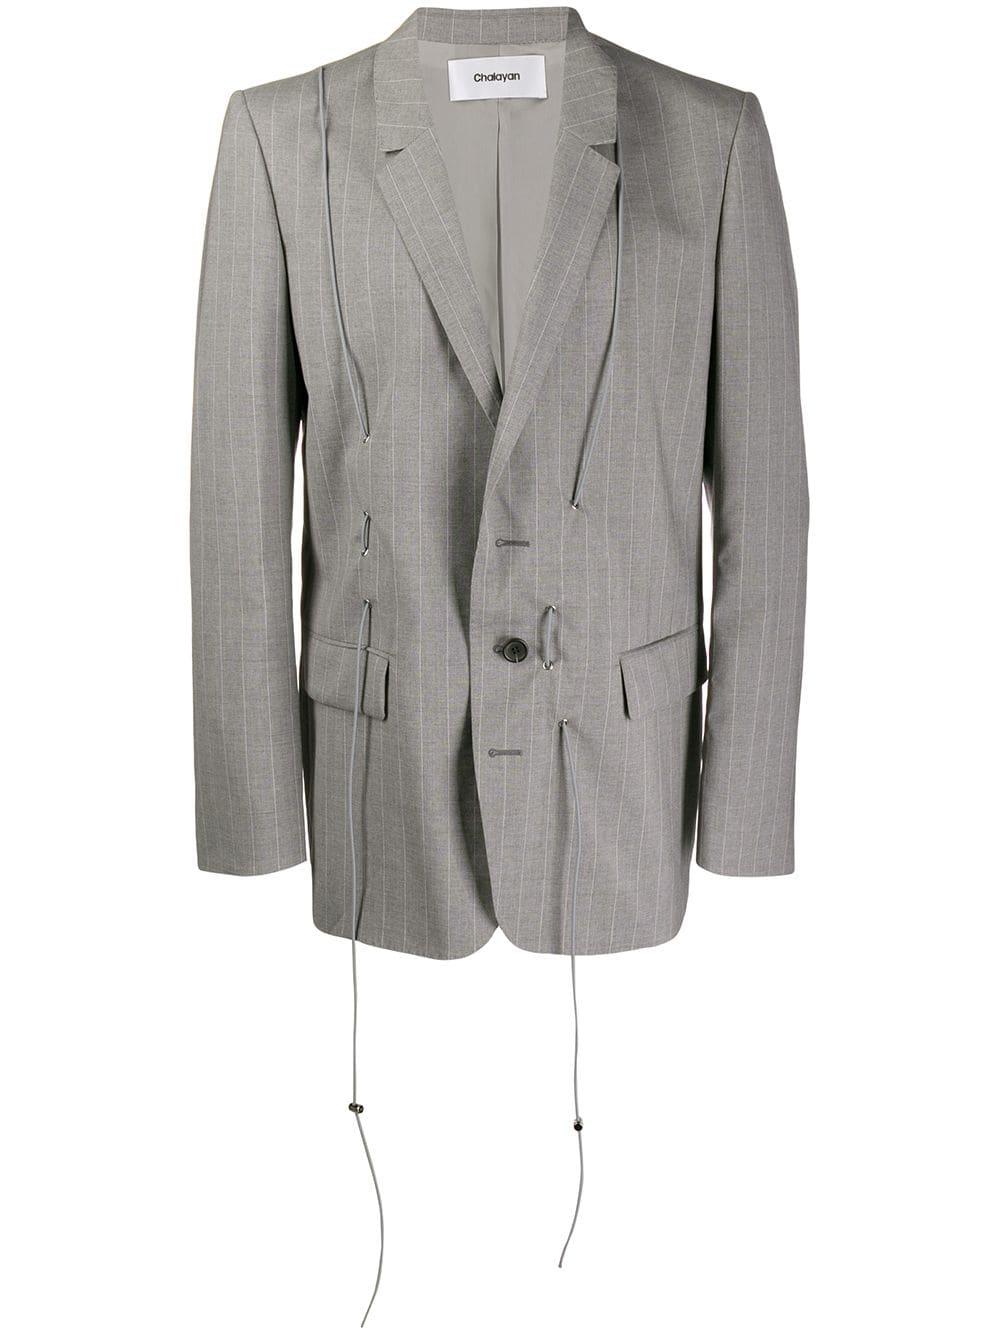 Hussein Chalayan toggle Detailed Blazer Jacket in Grey for Men